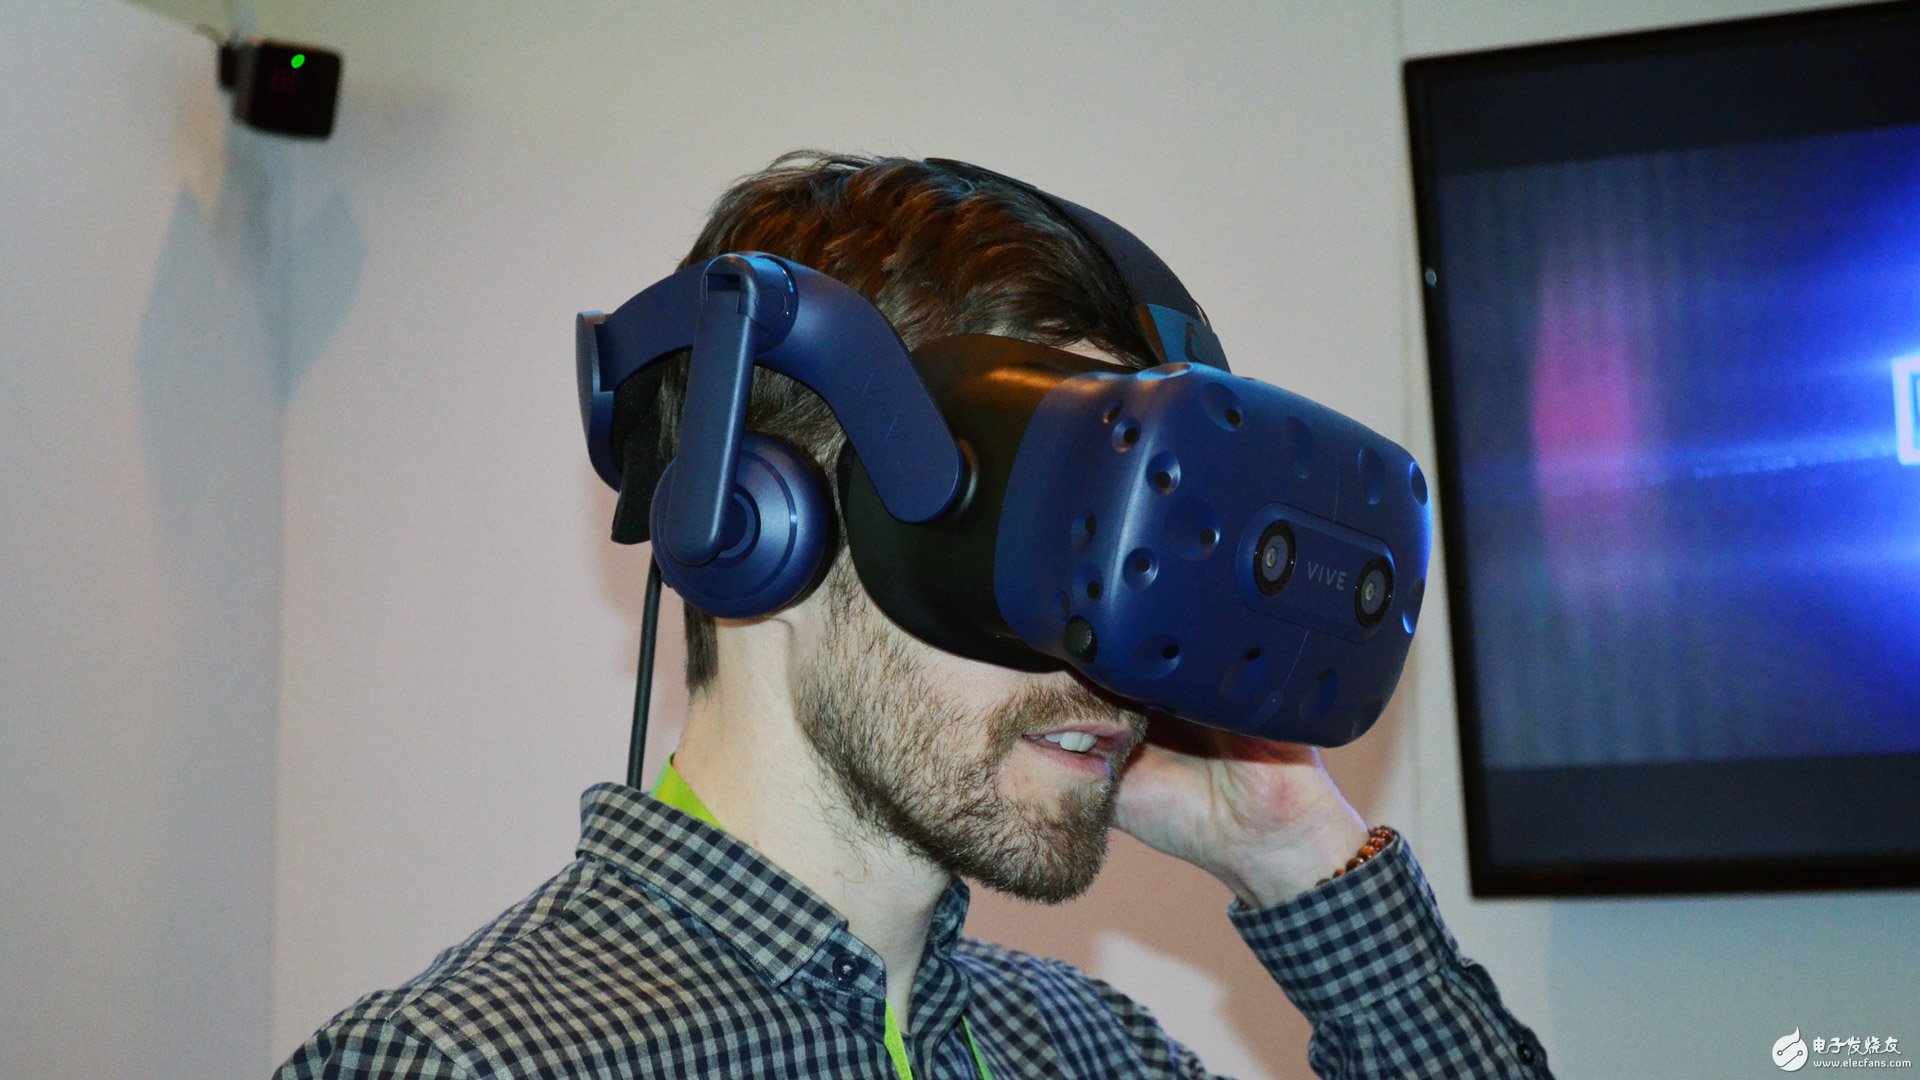 What is the cost of Vive Pro? Maybe it will be answered soon with the release of its price.